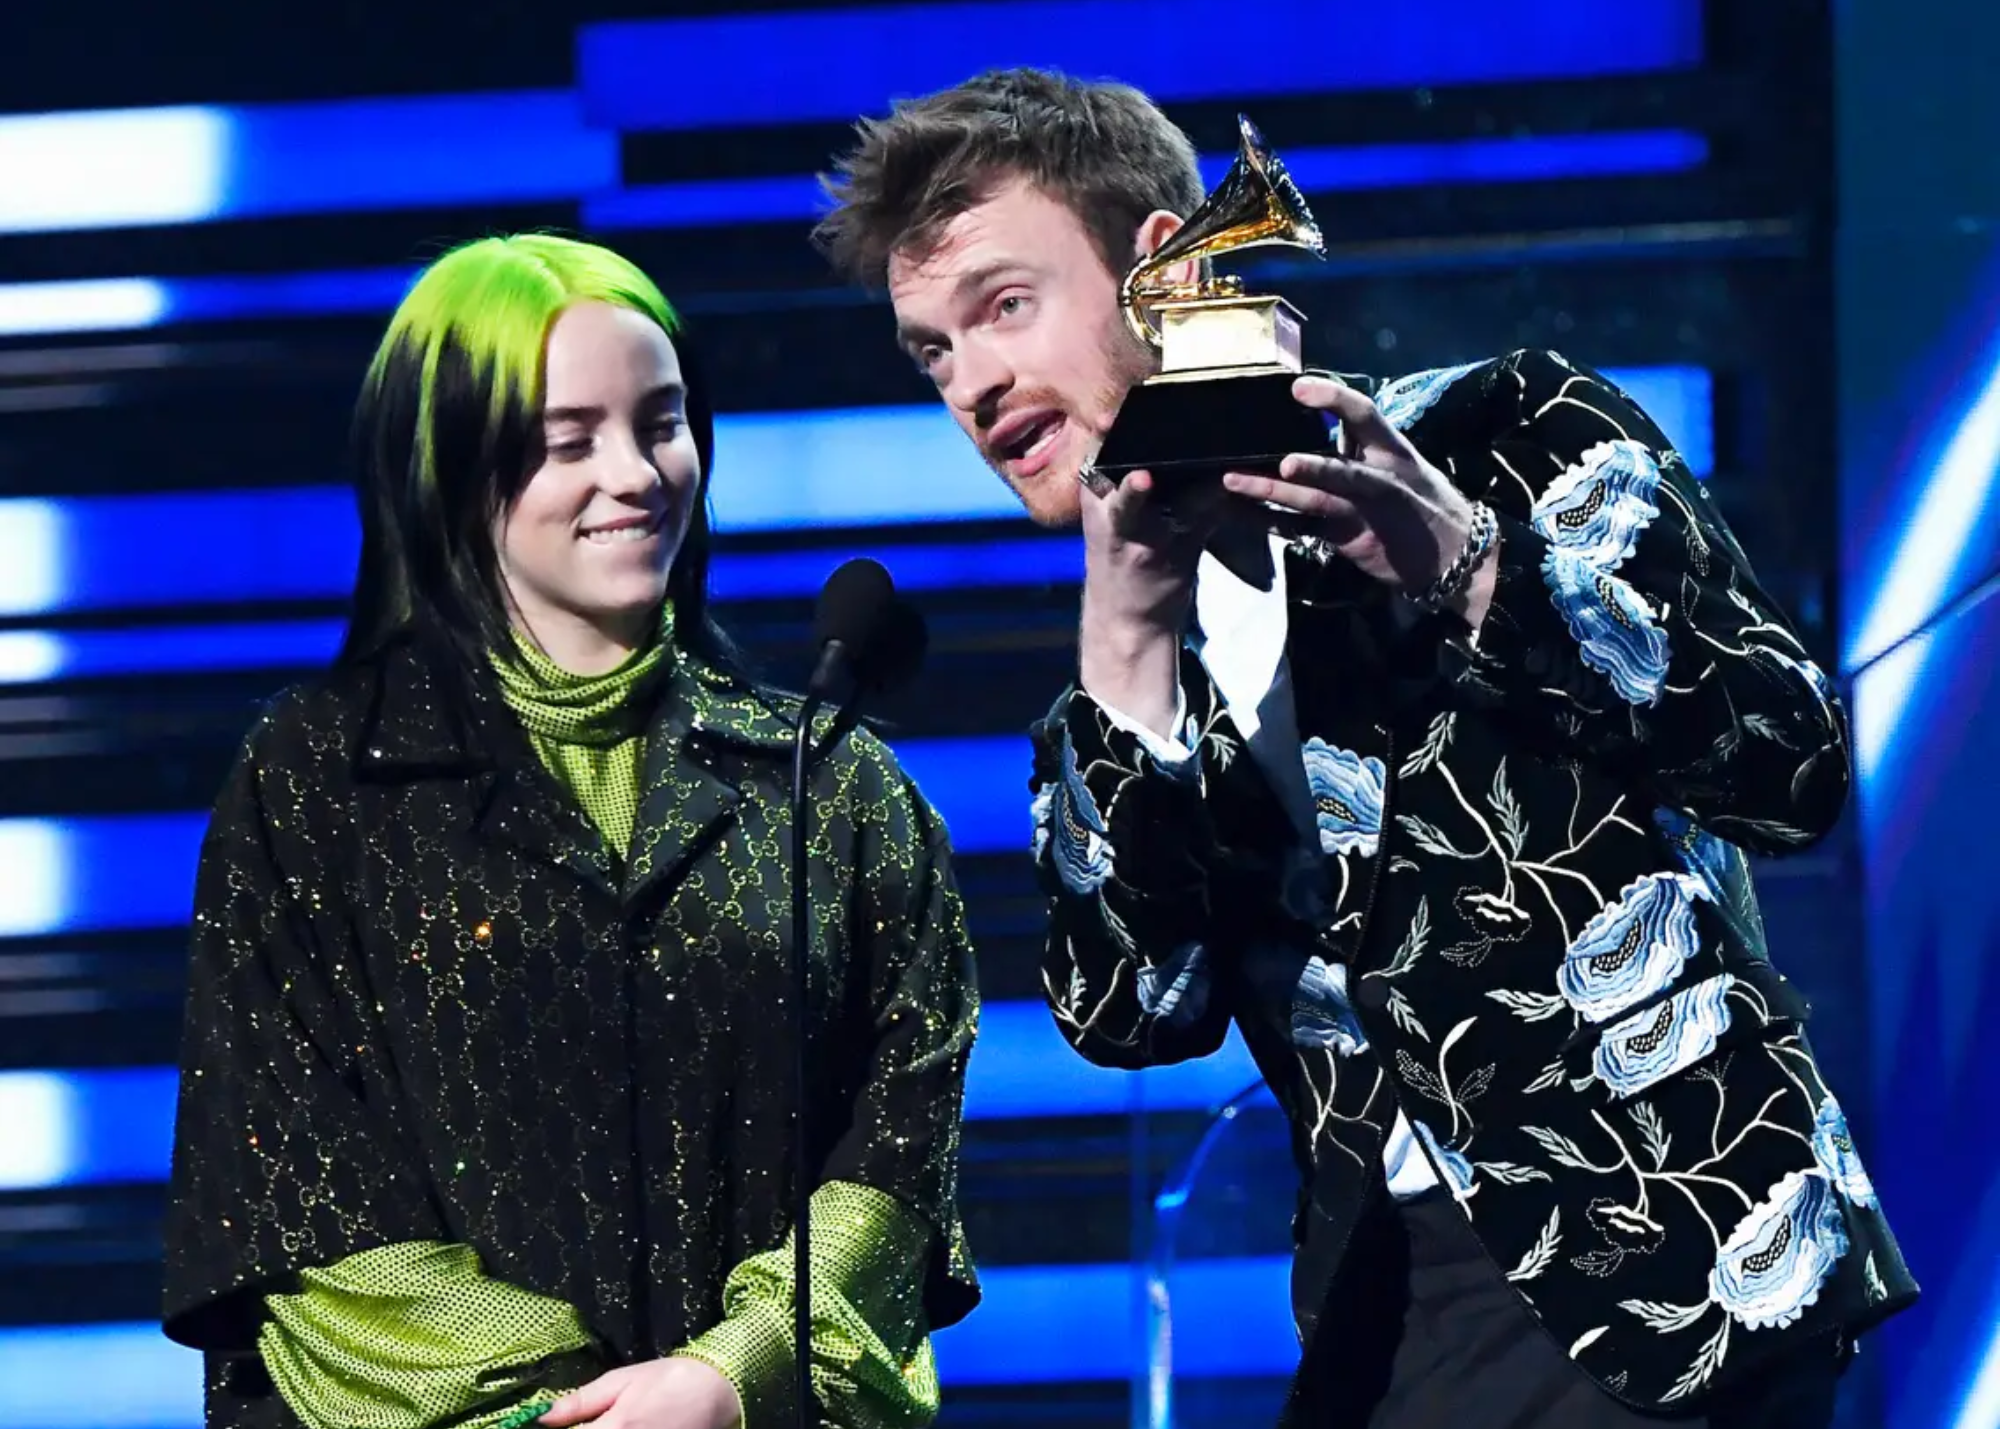 Are Billie Eilish And Finneas Dating - What's Real?